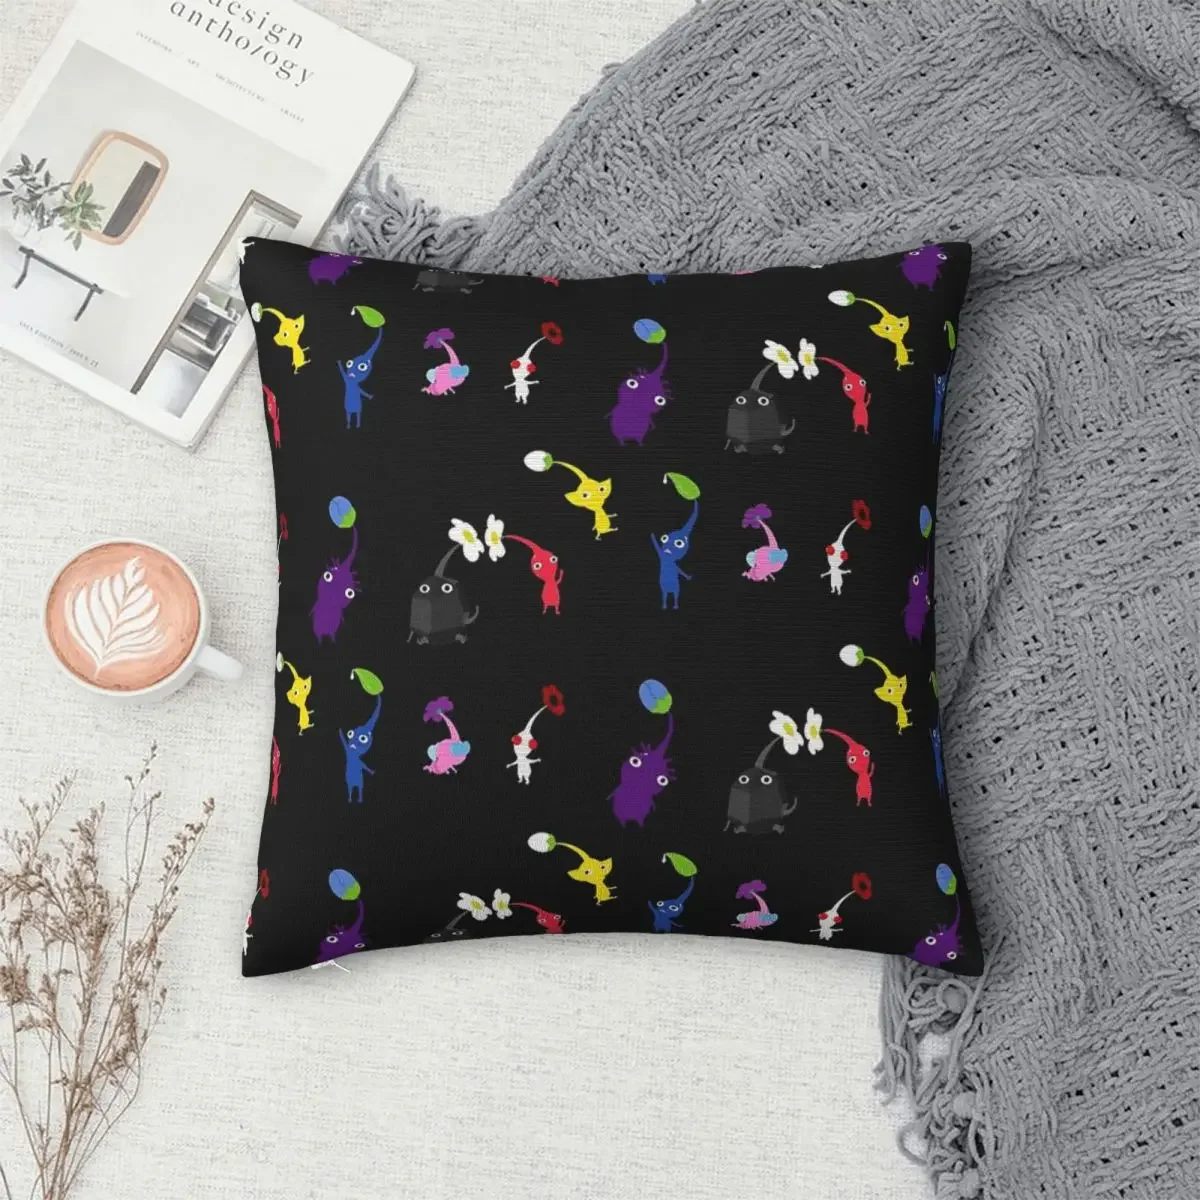 

Pikmin Pillowcase Polyester Pillows Cover Cushion Comfort Throw Pillow Sofa Decorative Cushions Used for Home Bedroom Sofa